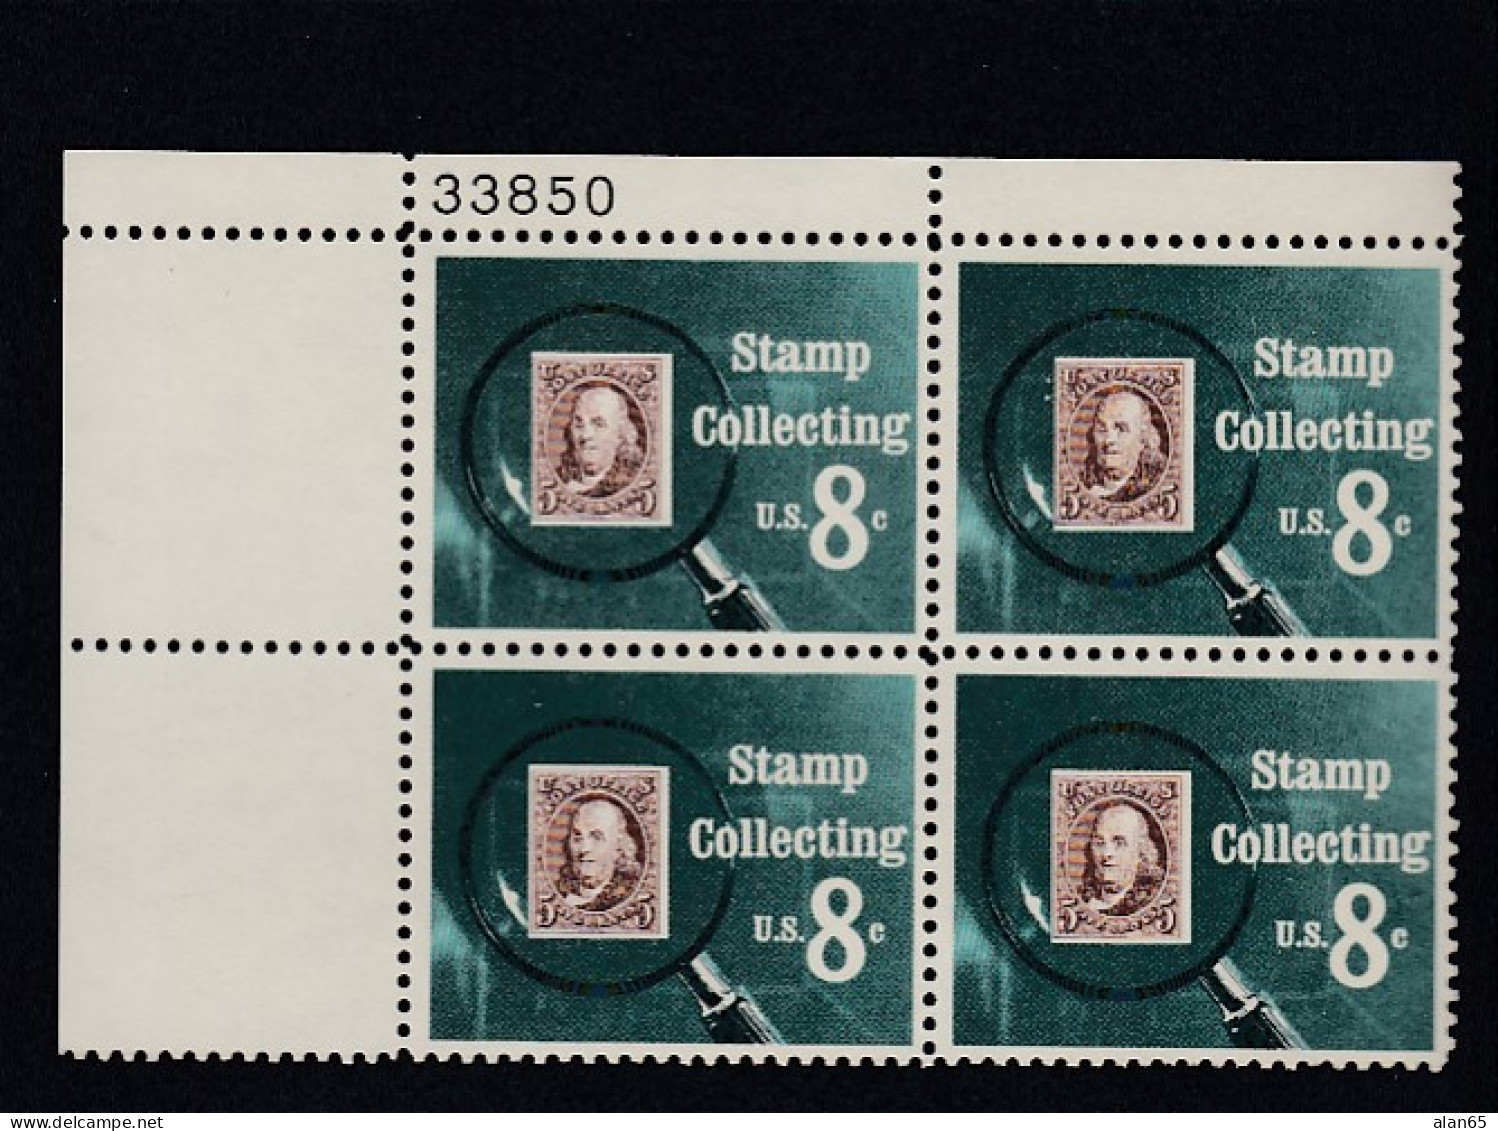 Sc#1474, 8-cent Stamp Collecting Theme 1972 Issue, Plate # Block Of 4 US Stamps - Plate Blocks & Sheetlets